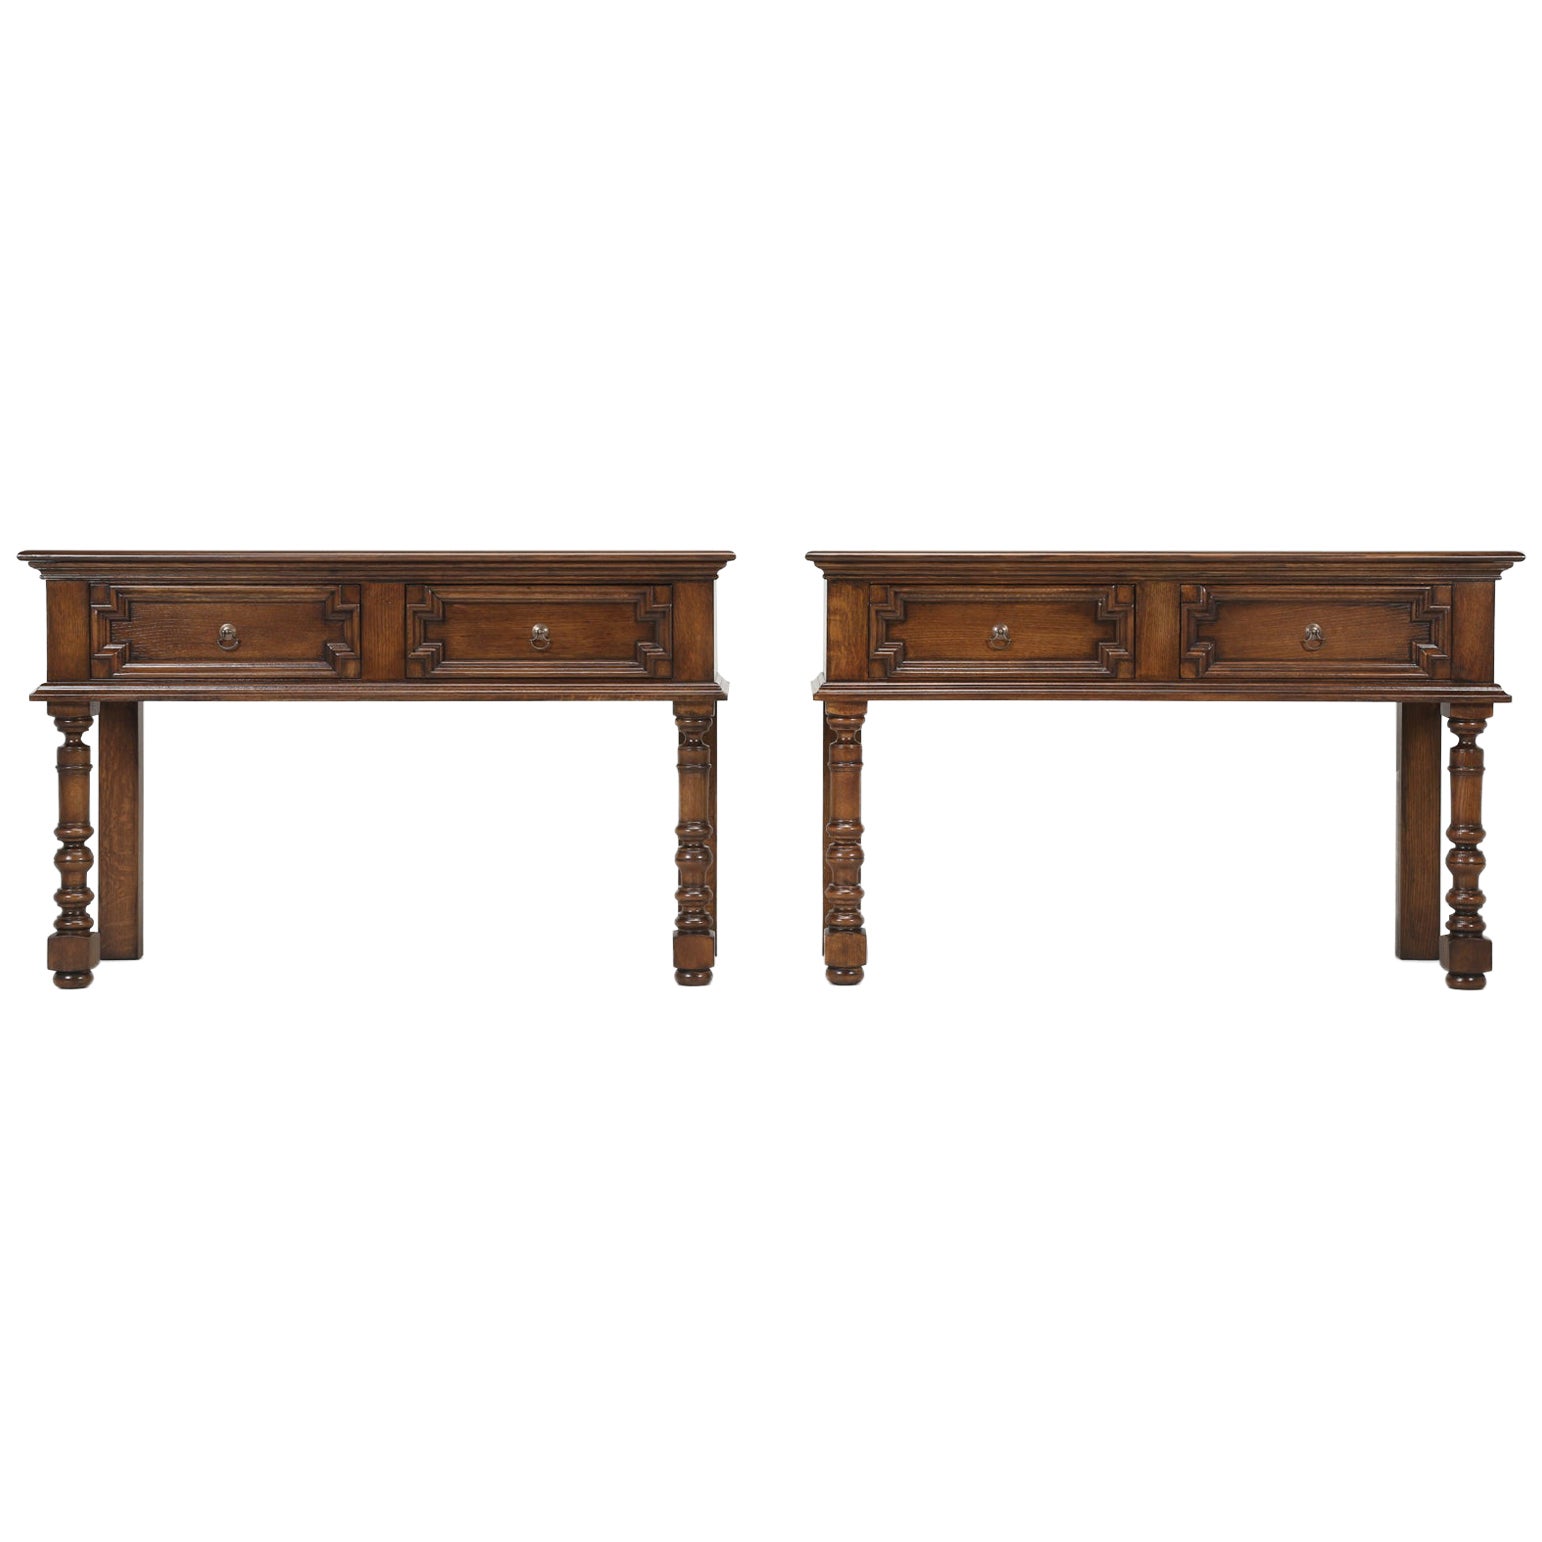 Pair Country English Console Tables Fabricated in House, Style William and Mary